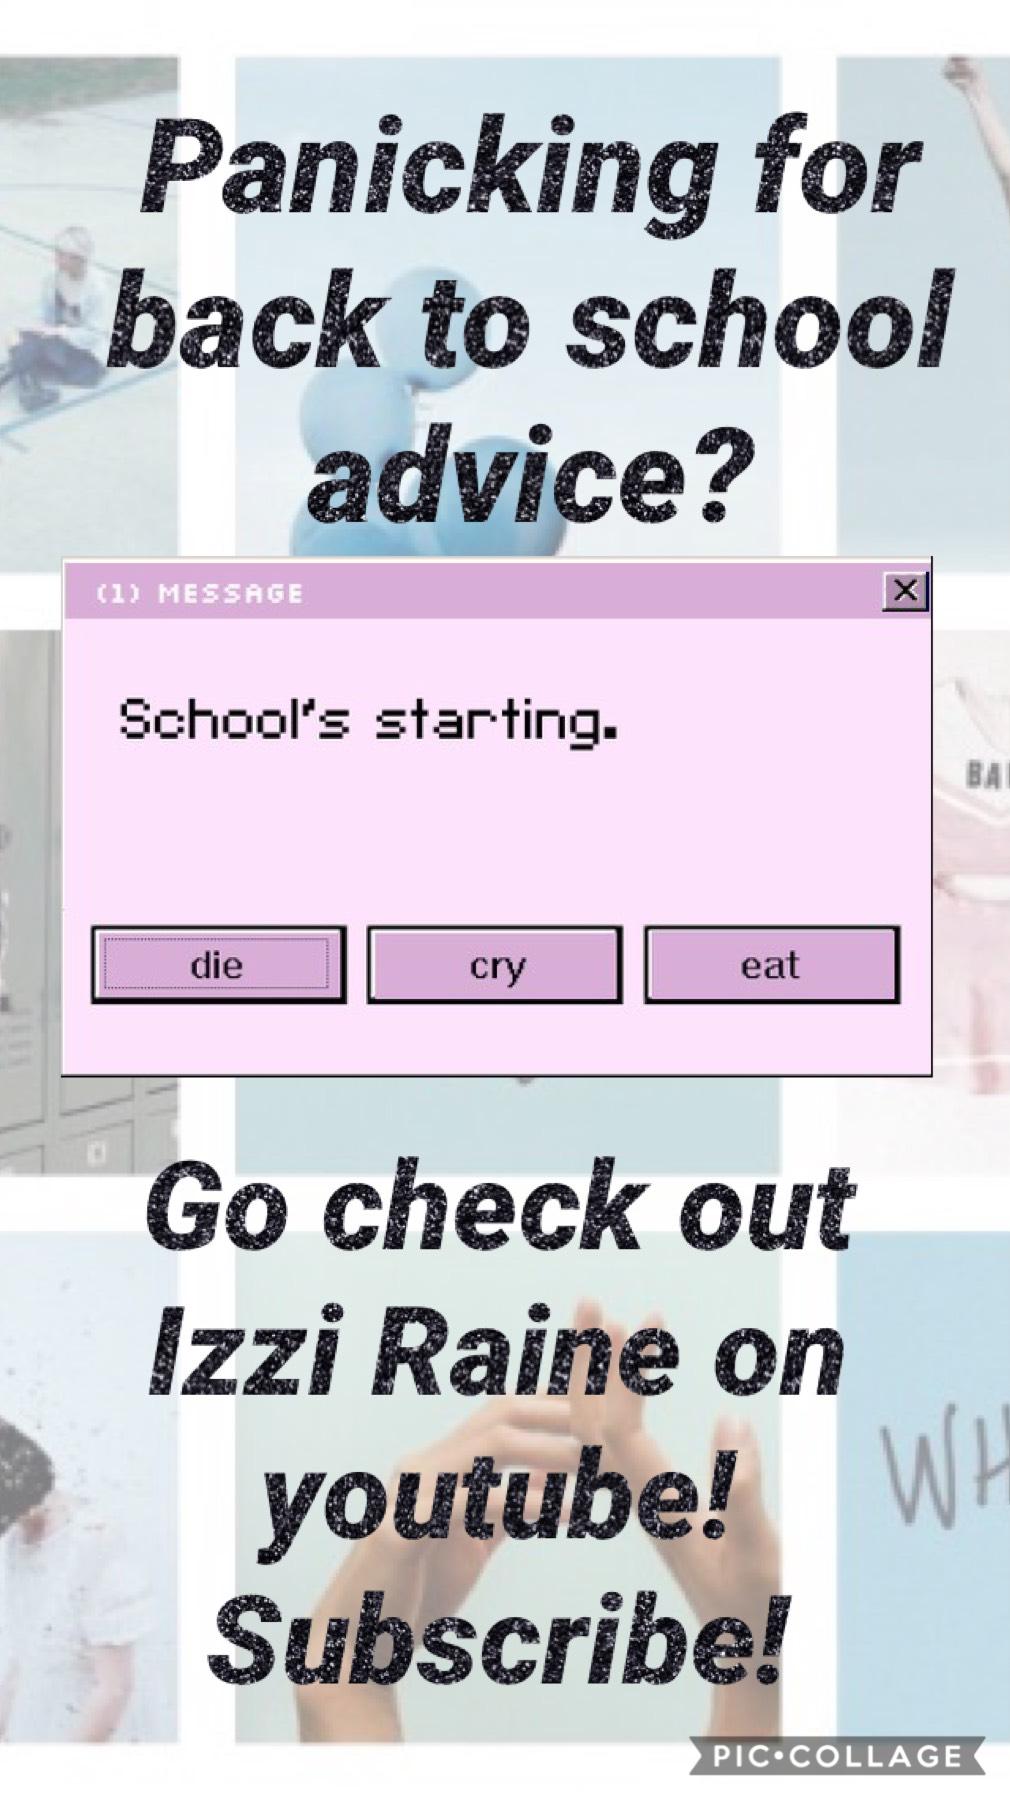 👾Click Me👾
I’ve been uploading back to school advice videos almost every day!! Go check them out and comment what sorts of advice you’d like to hear!!
tags: #school #freshman #sophomore #junior #senior #middleschool #juniorhigh #highschool #firstdayofscho